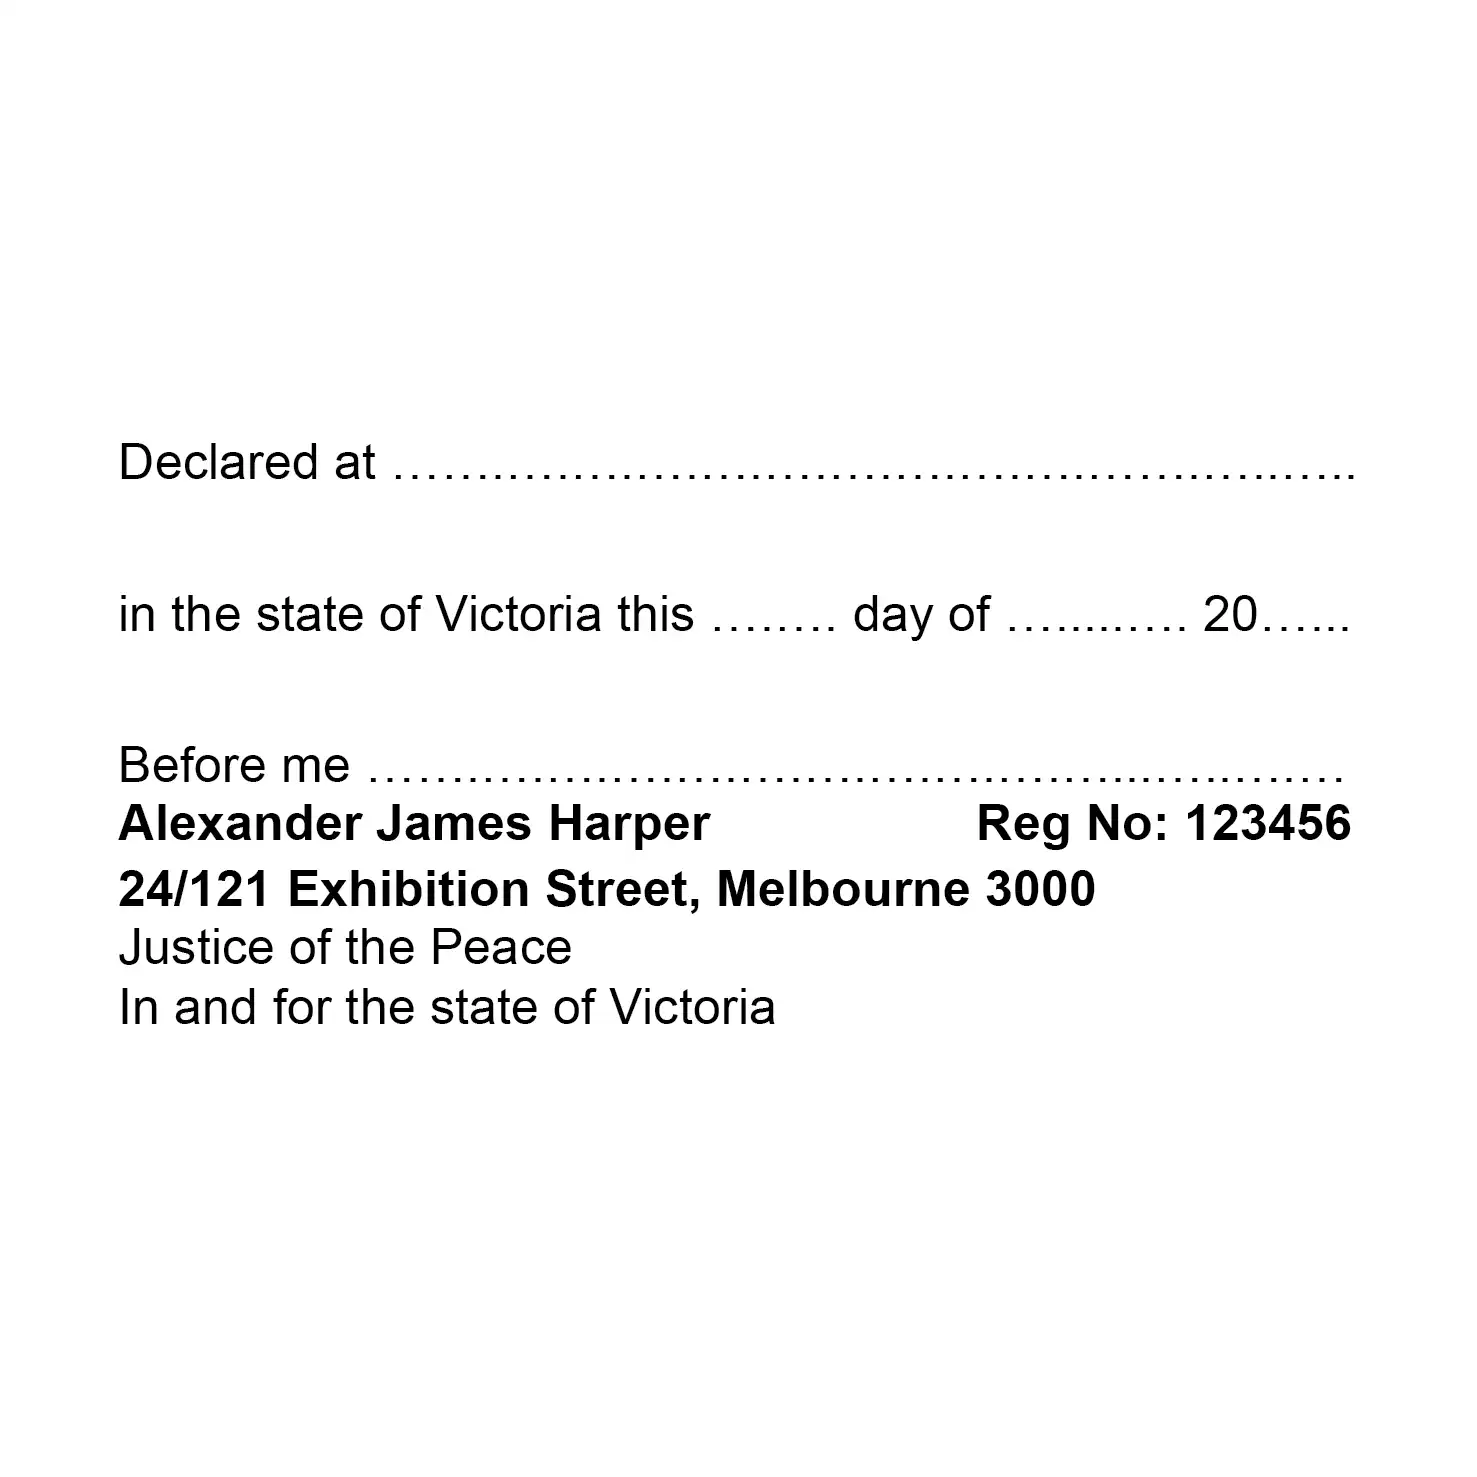 Template stamp for Victorian Statutory Declaration